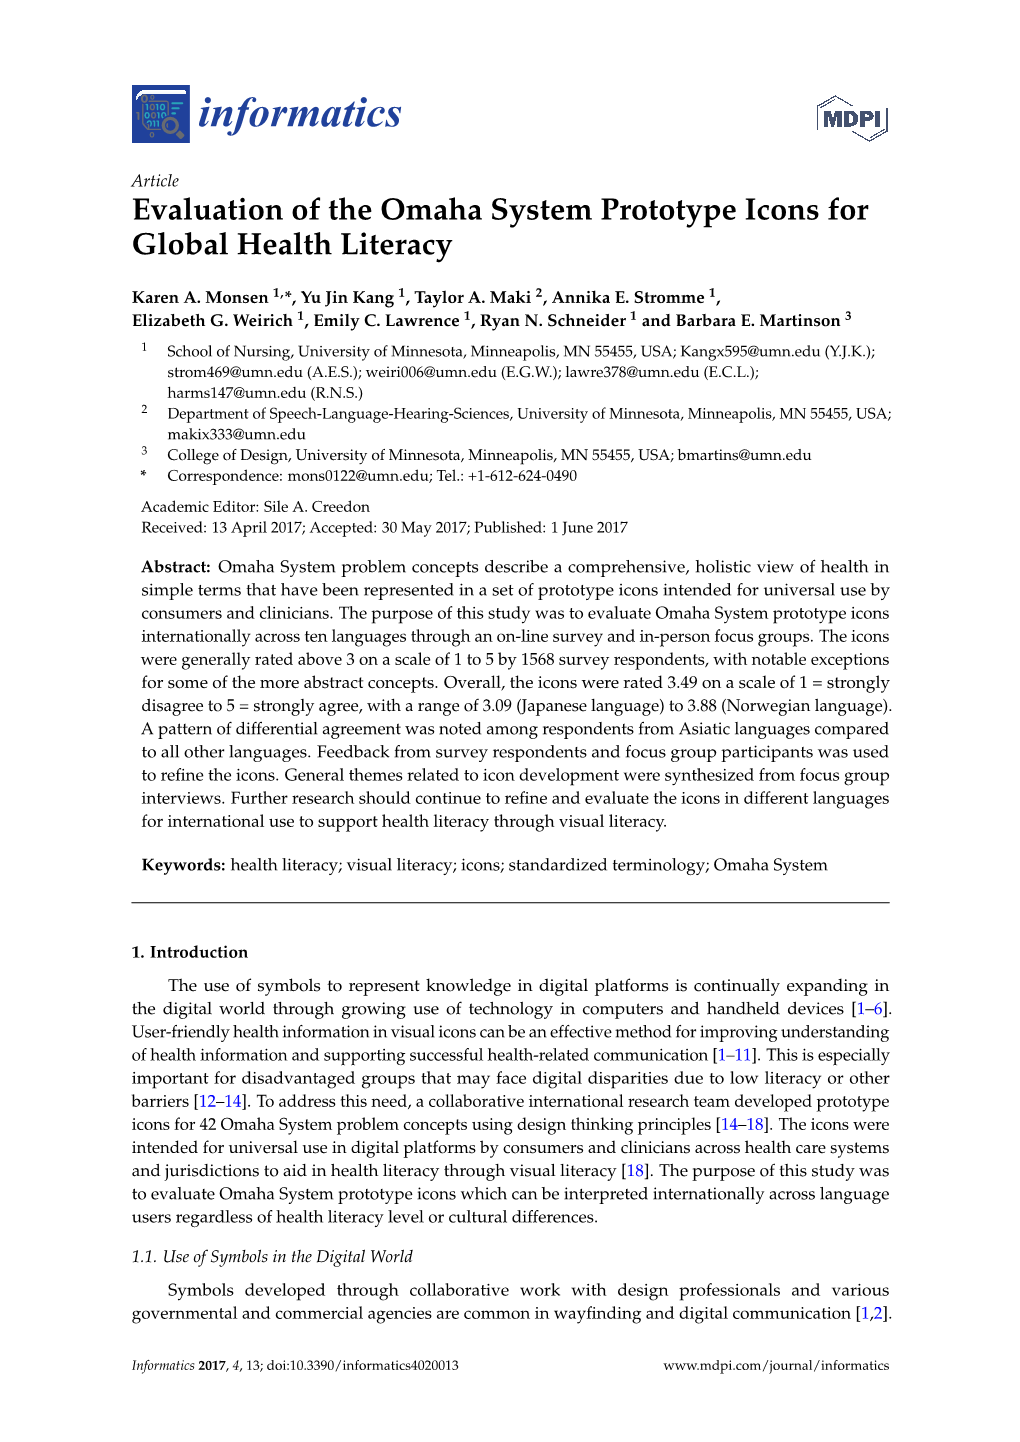 Evaluation of the Omaha System Prototype Icons for Global Health Literacy